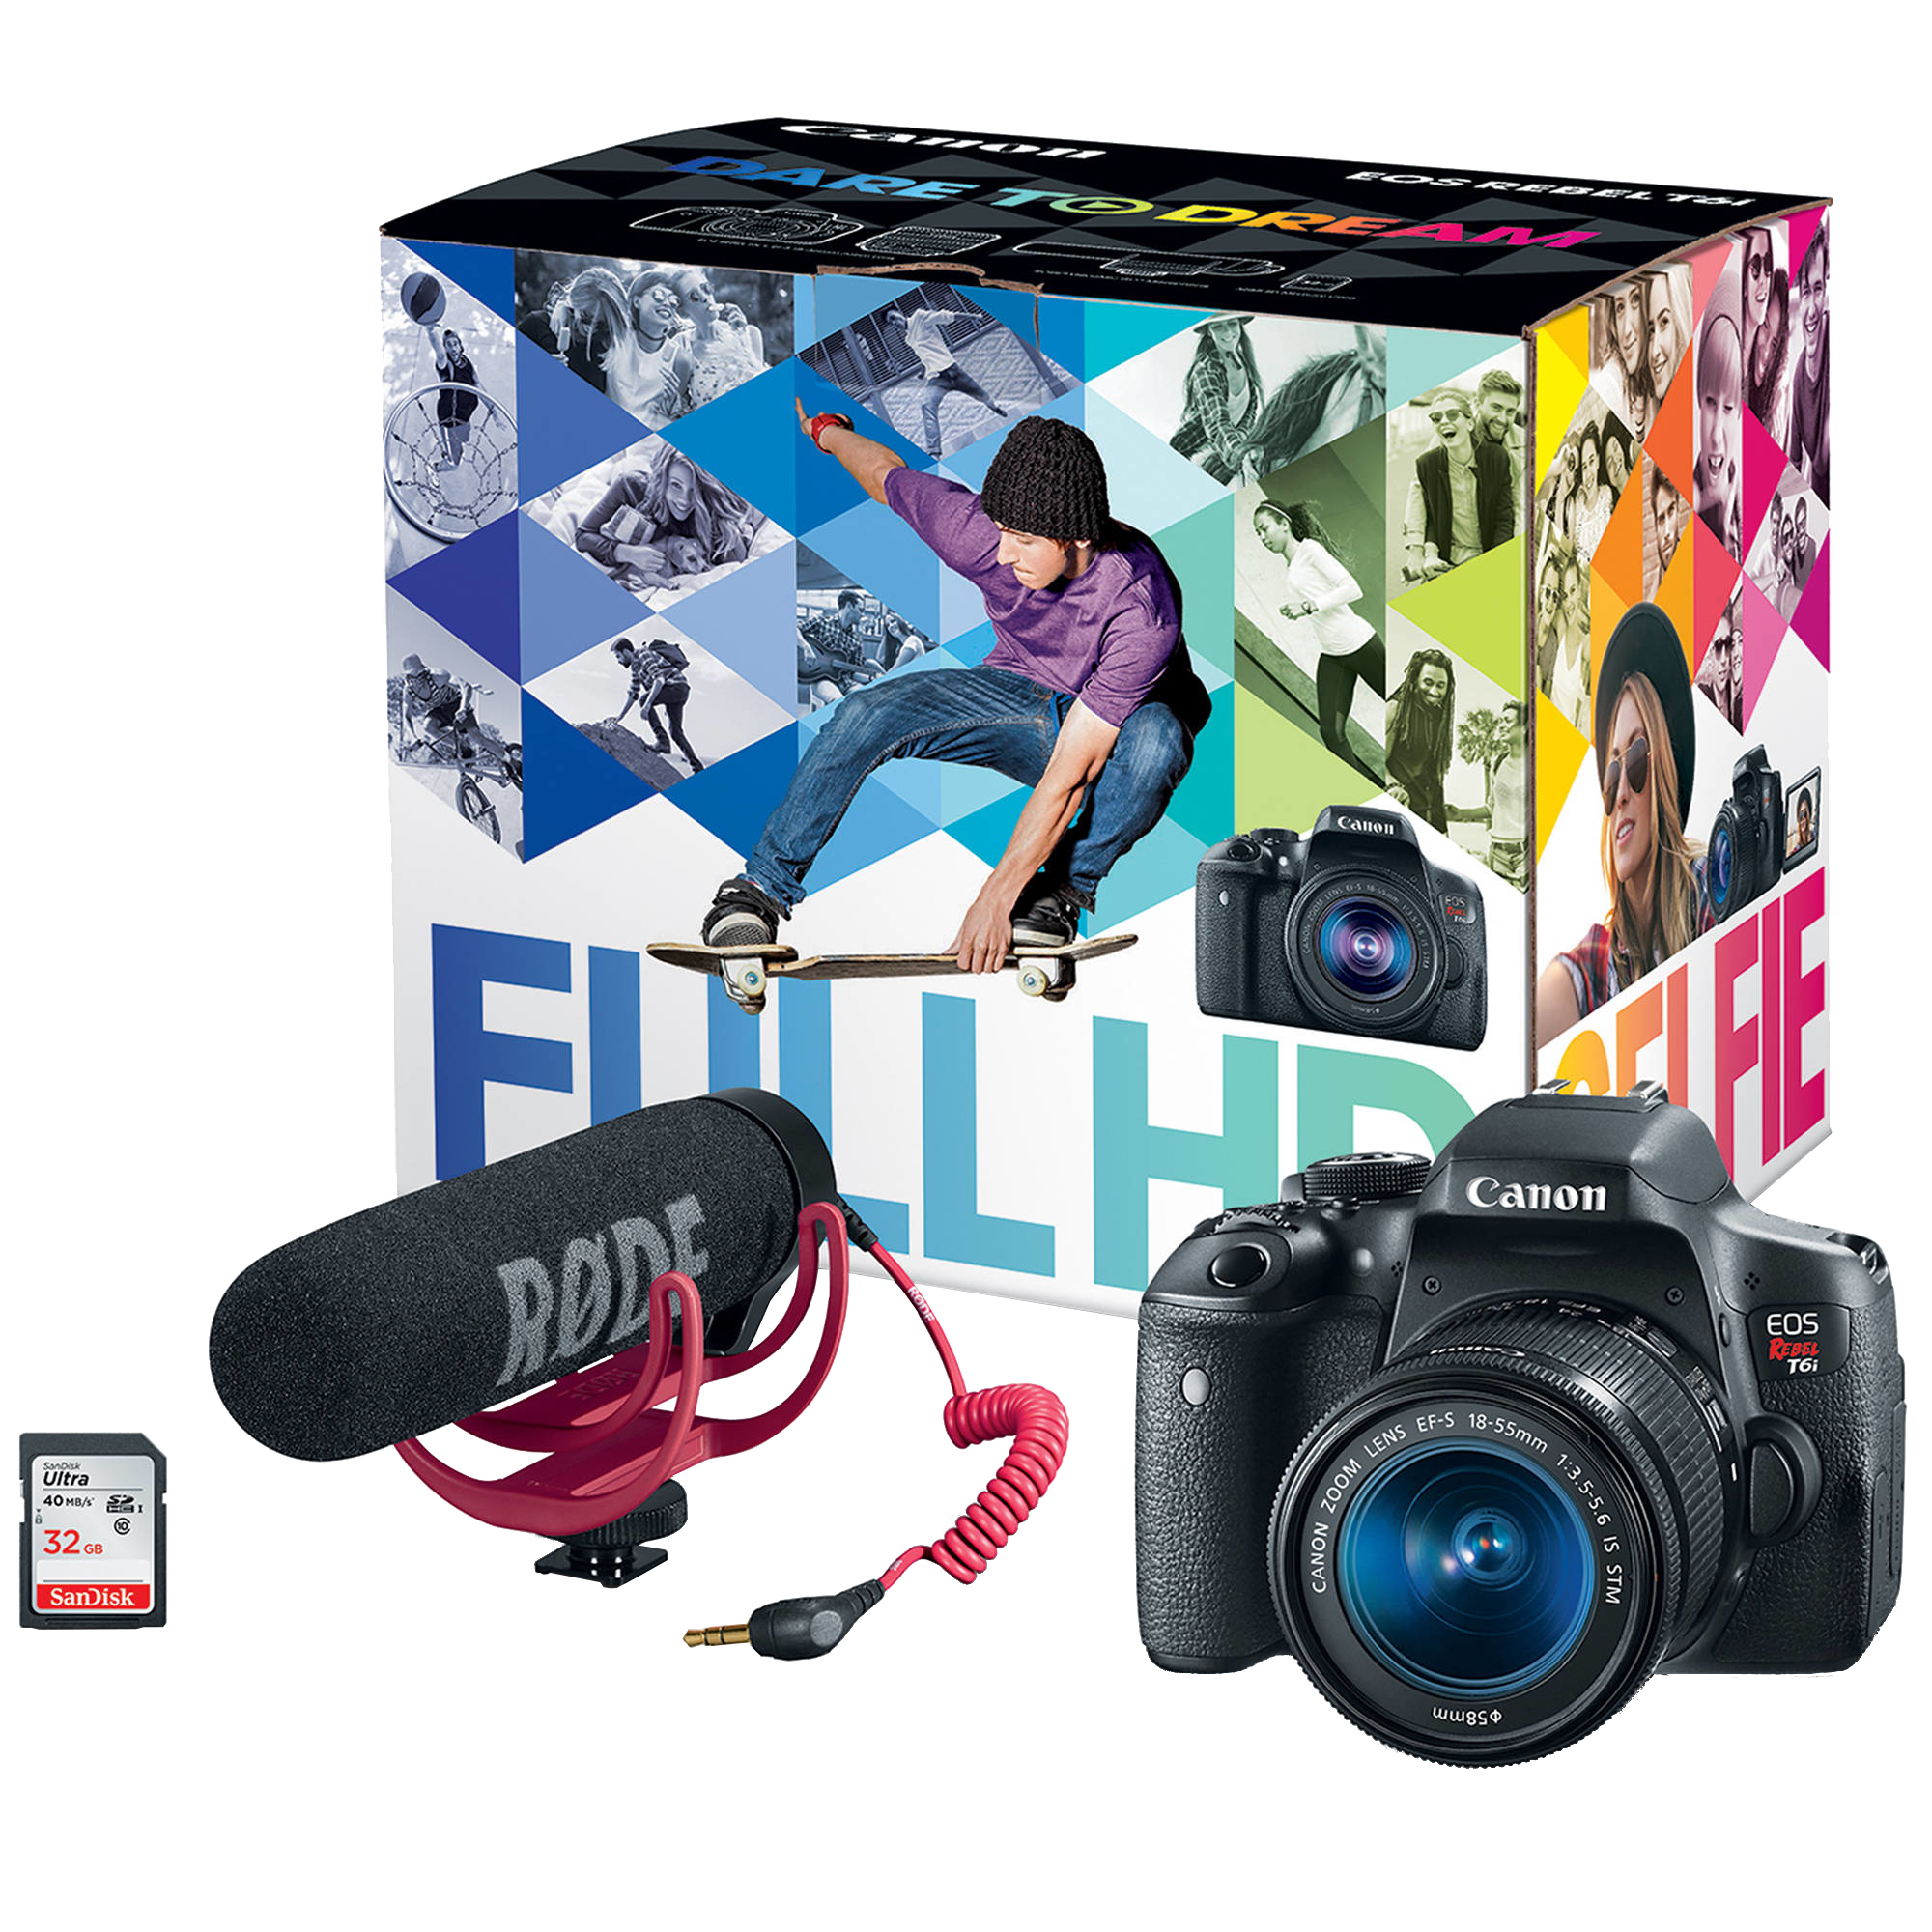 Canon EOS Rebel T6i - Video Creator Kit - digital camera - SLR - 24.2 MP - APS-C - 1080p - 3x optical zoom EF-S 18-55mm IS STM lens - Wi-Fi, NFC - with RODE VideoMic GO